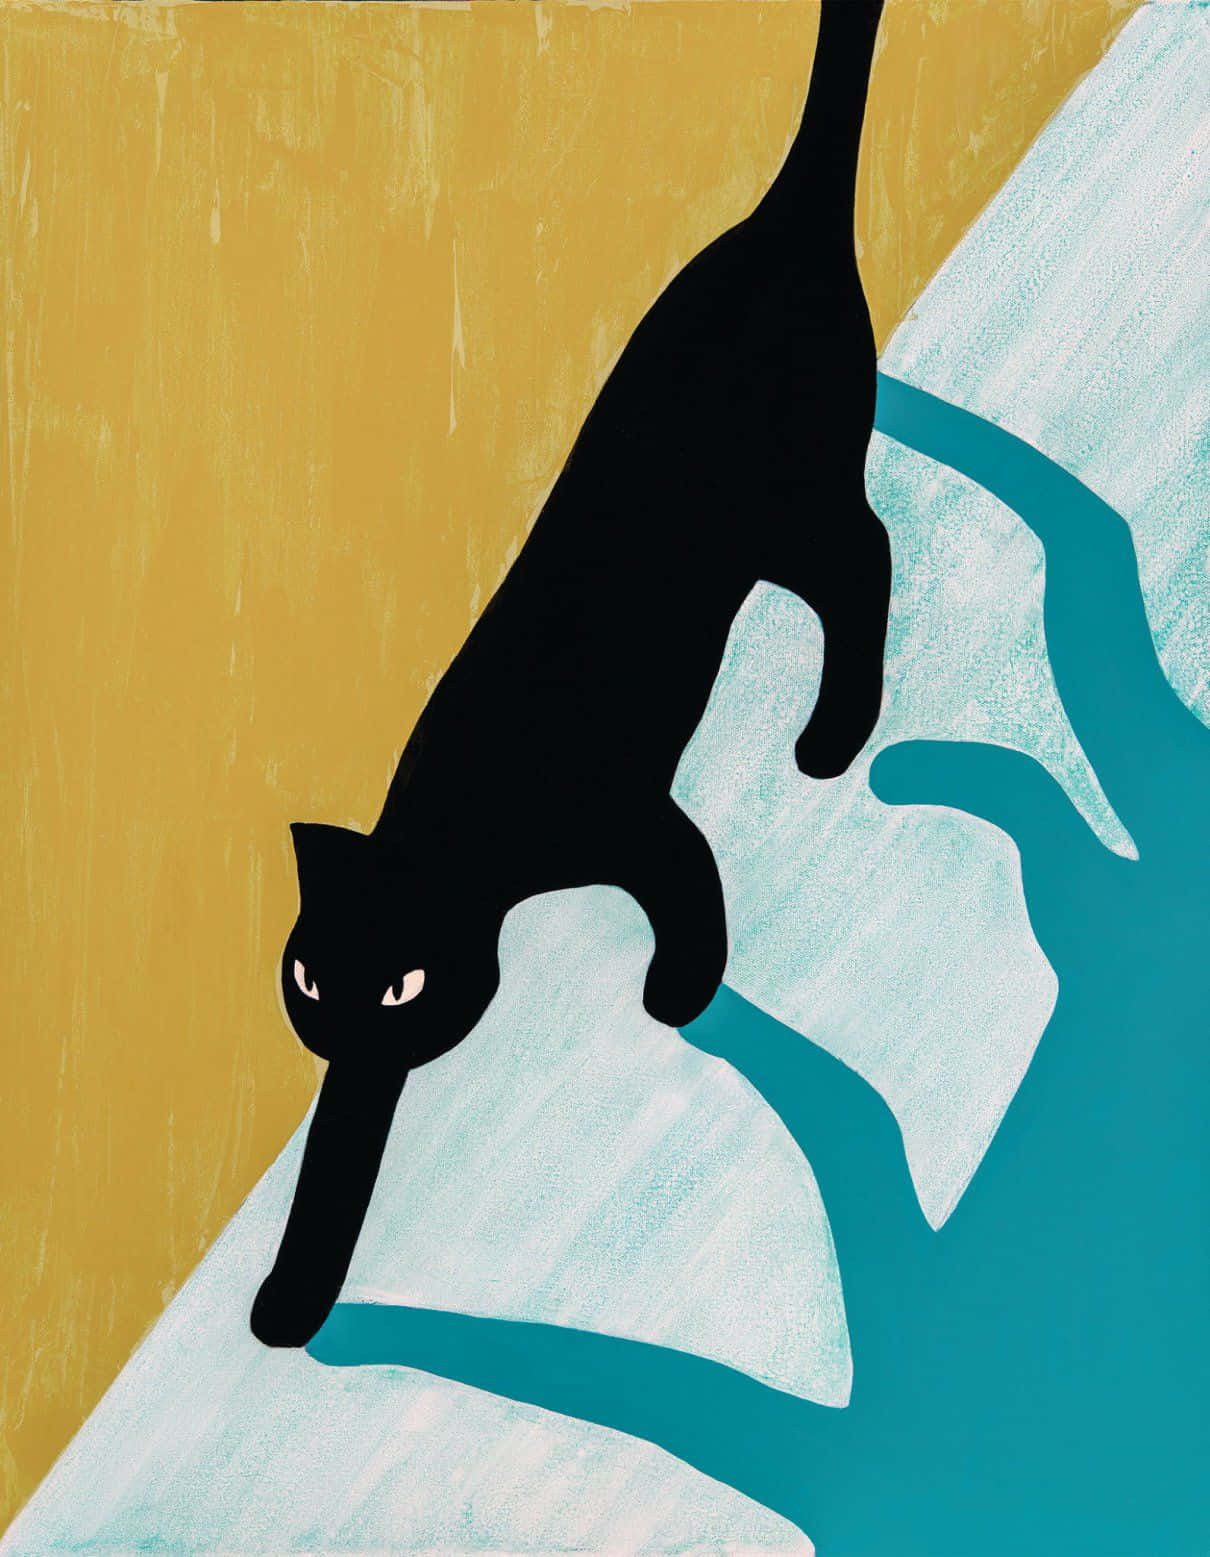 'The beauty of a Black Cat, peering into the unknown'